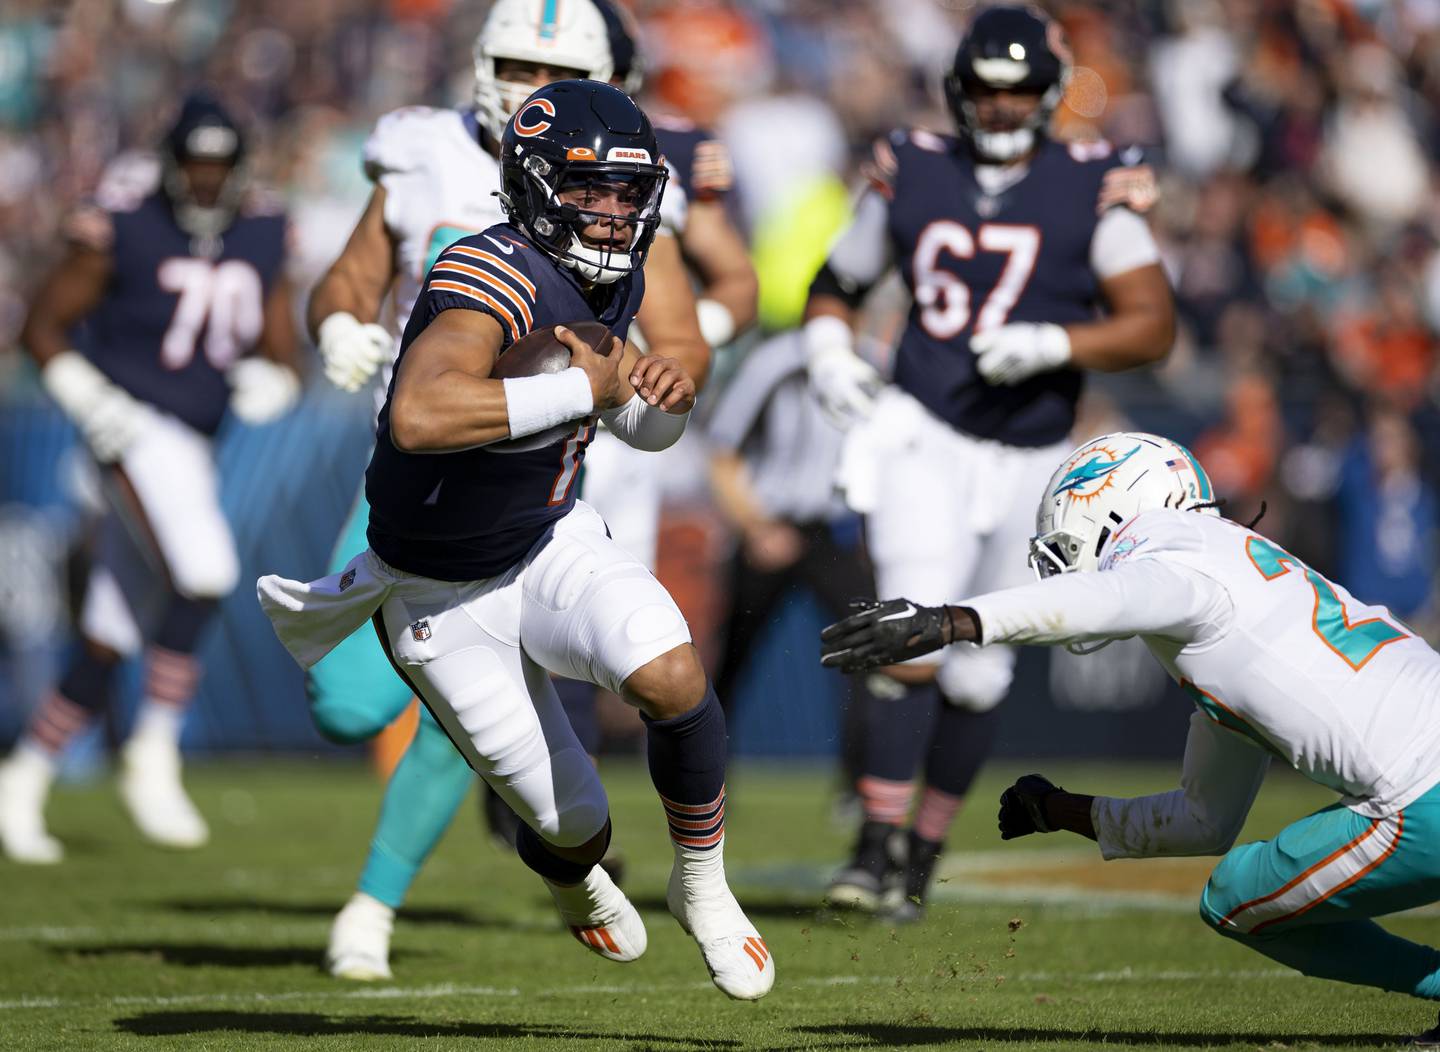 Bears quarterback Justin Fields runs the ball against the Dolphins in the first quarter at Soldier Field on Nov. 6, 2022.